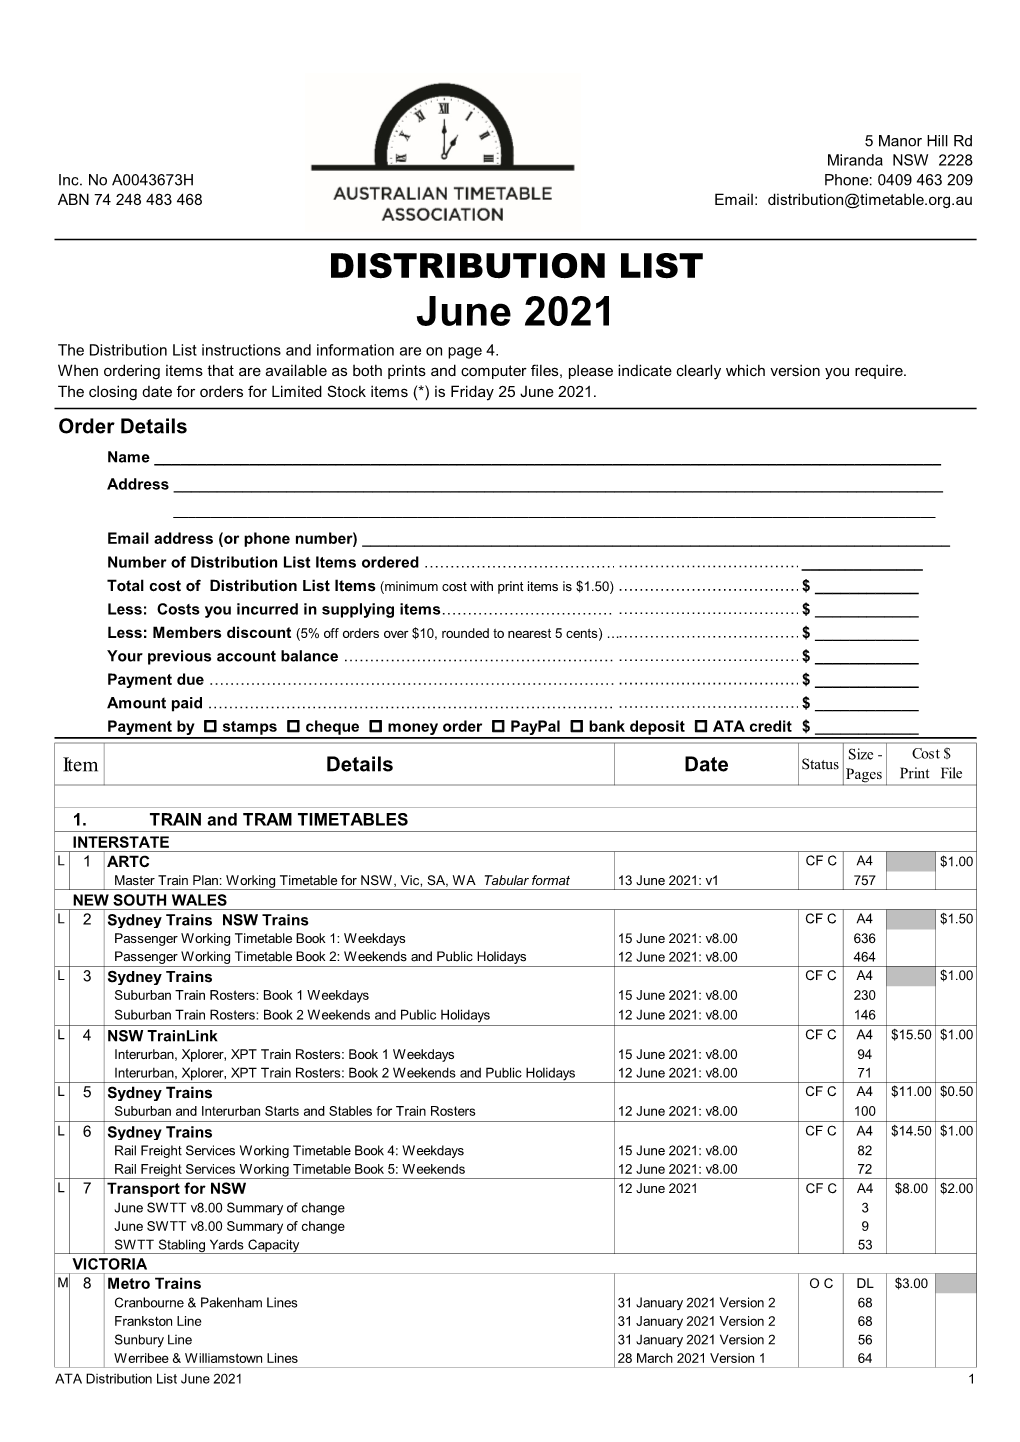 June 2021 the Distribution List Instructions and Information Are on Page 4